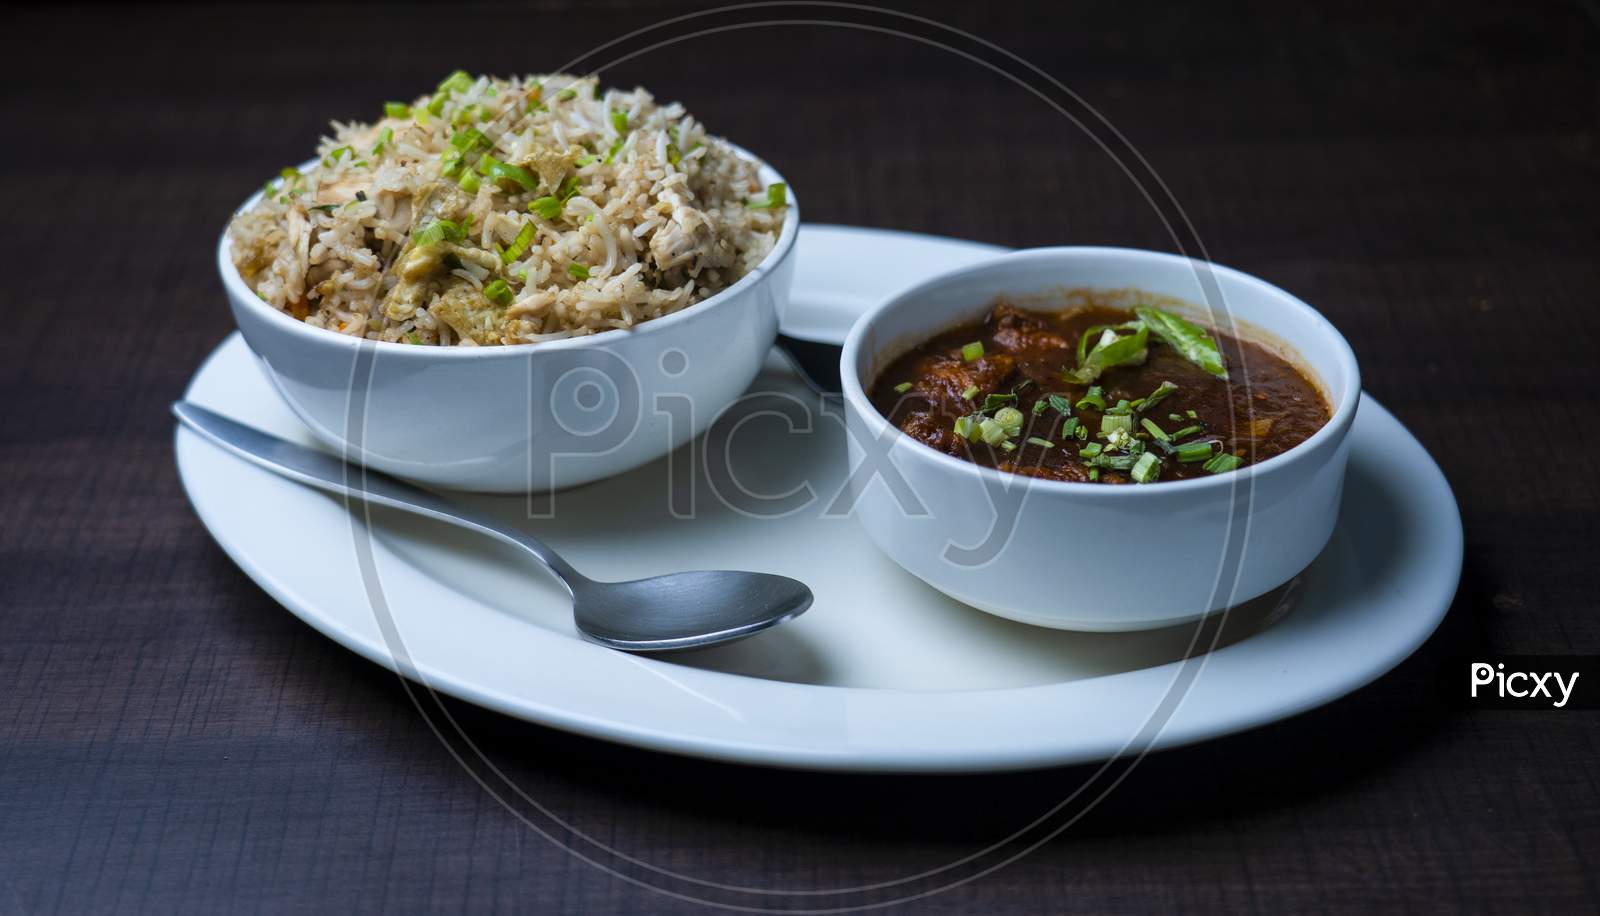 Fried rice with chicken, chicken manchurian garnished with spring onions. Prepared and served in a white plate. wood texture in the background